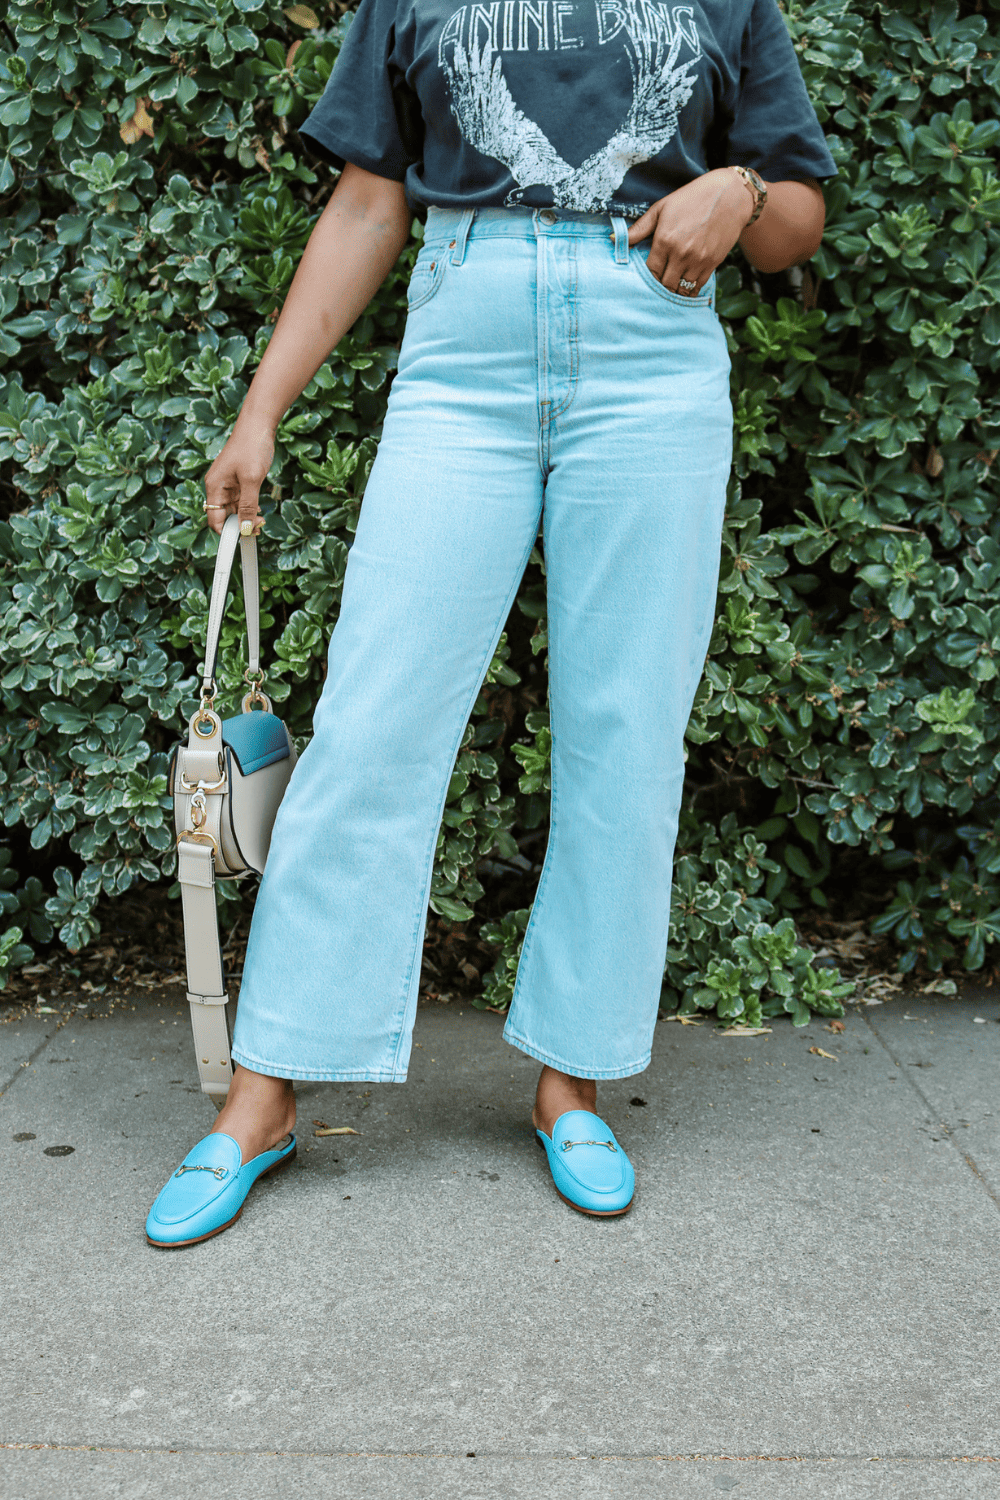 Levis Ribcage Straight Leg Jeans Review - Why I am so Obsessed